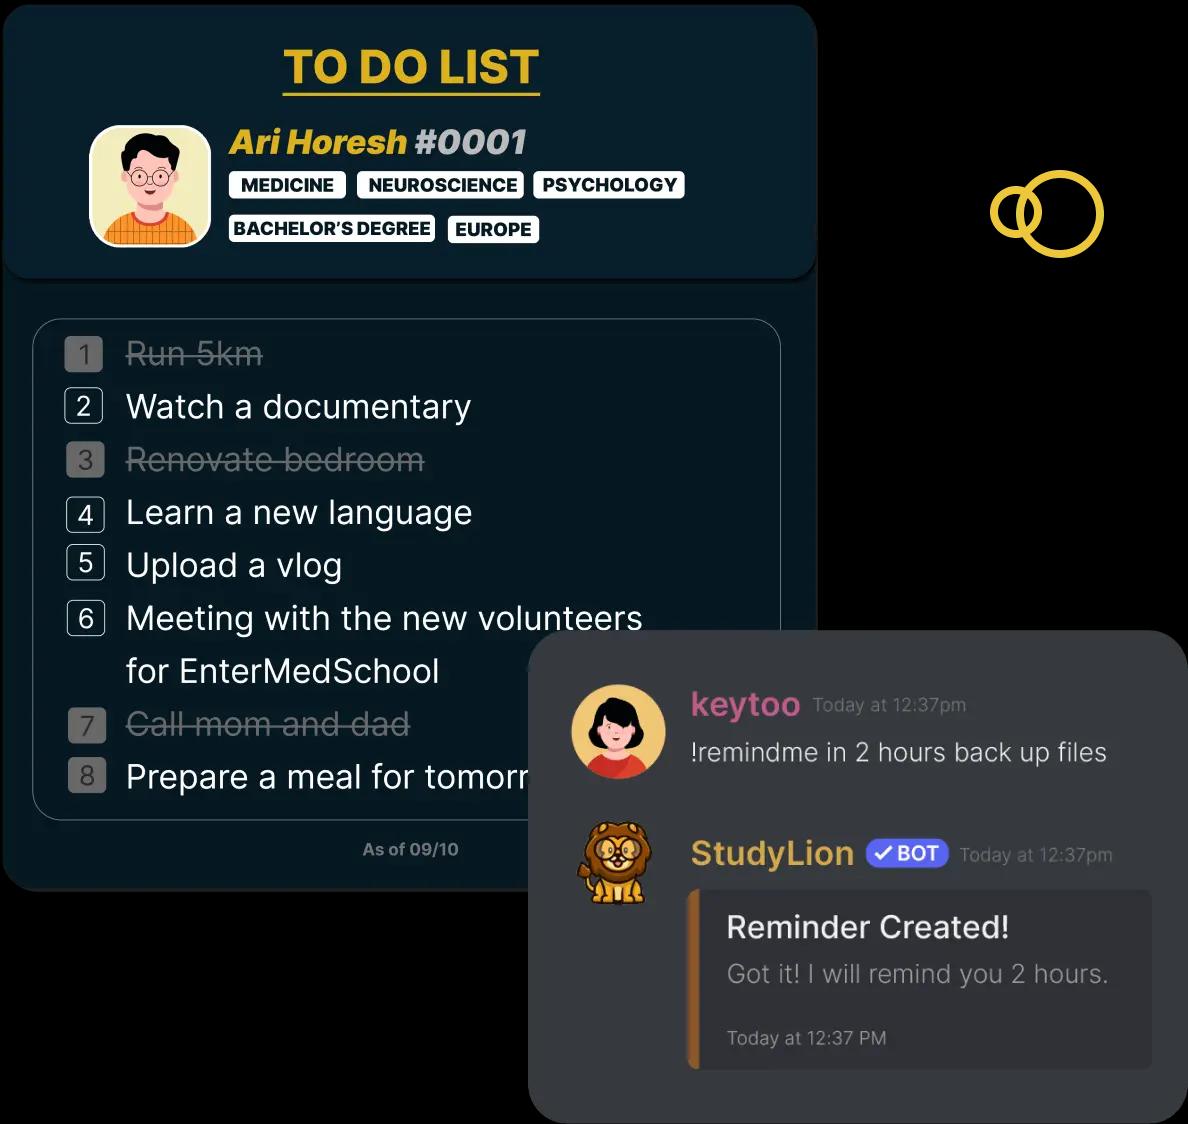 To-do and Reminders image